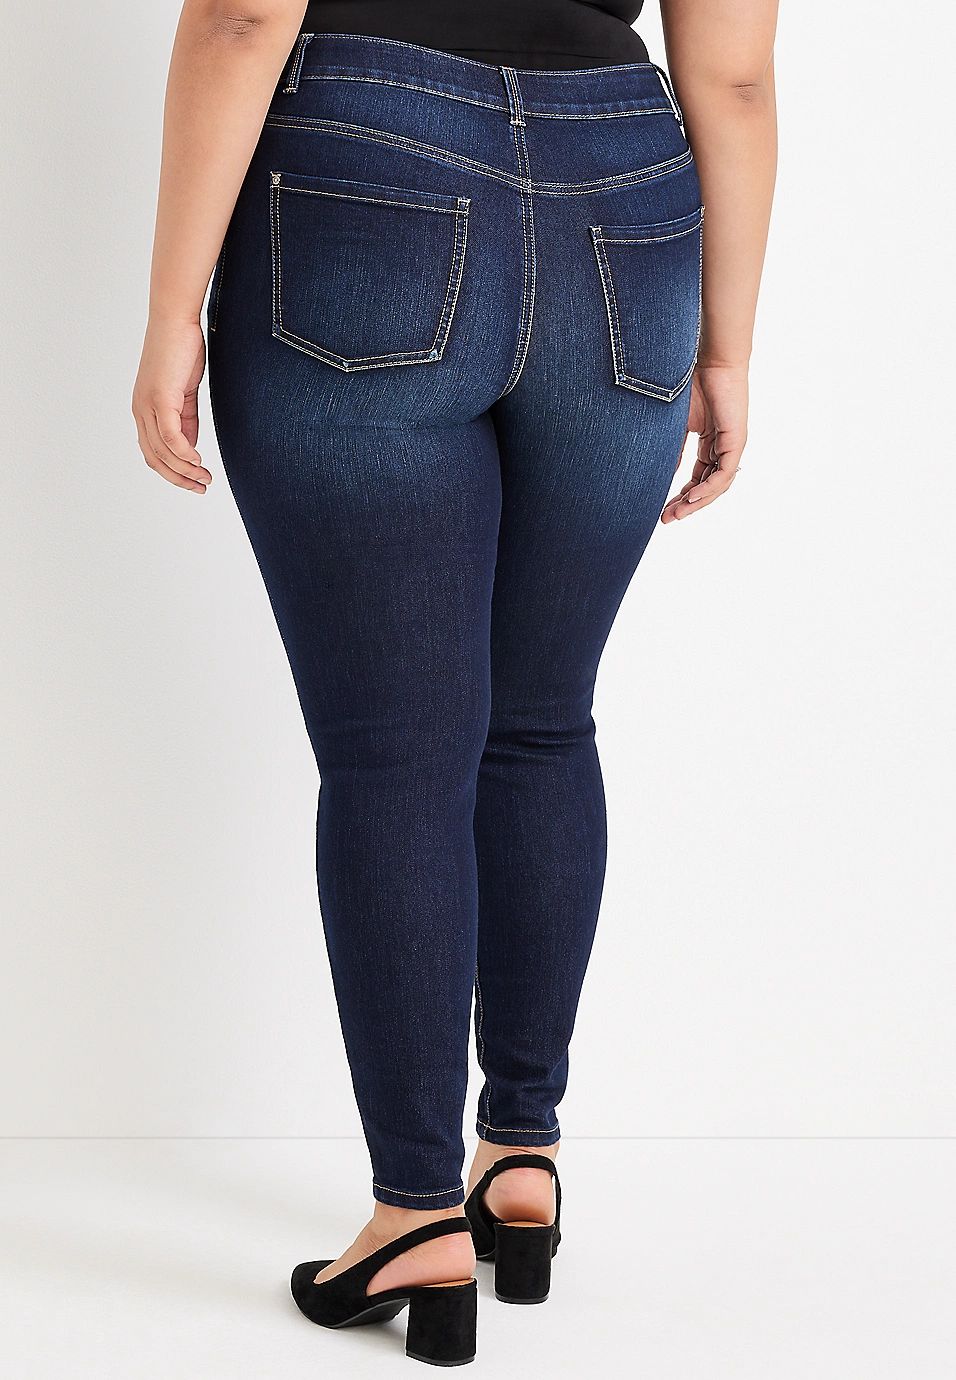 Plus Size m jeans by maurices™ Everflex™ Super Skinny Curvy High Rise Jean | Maurices